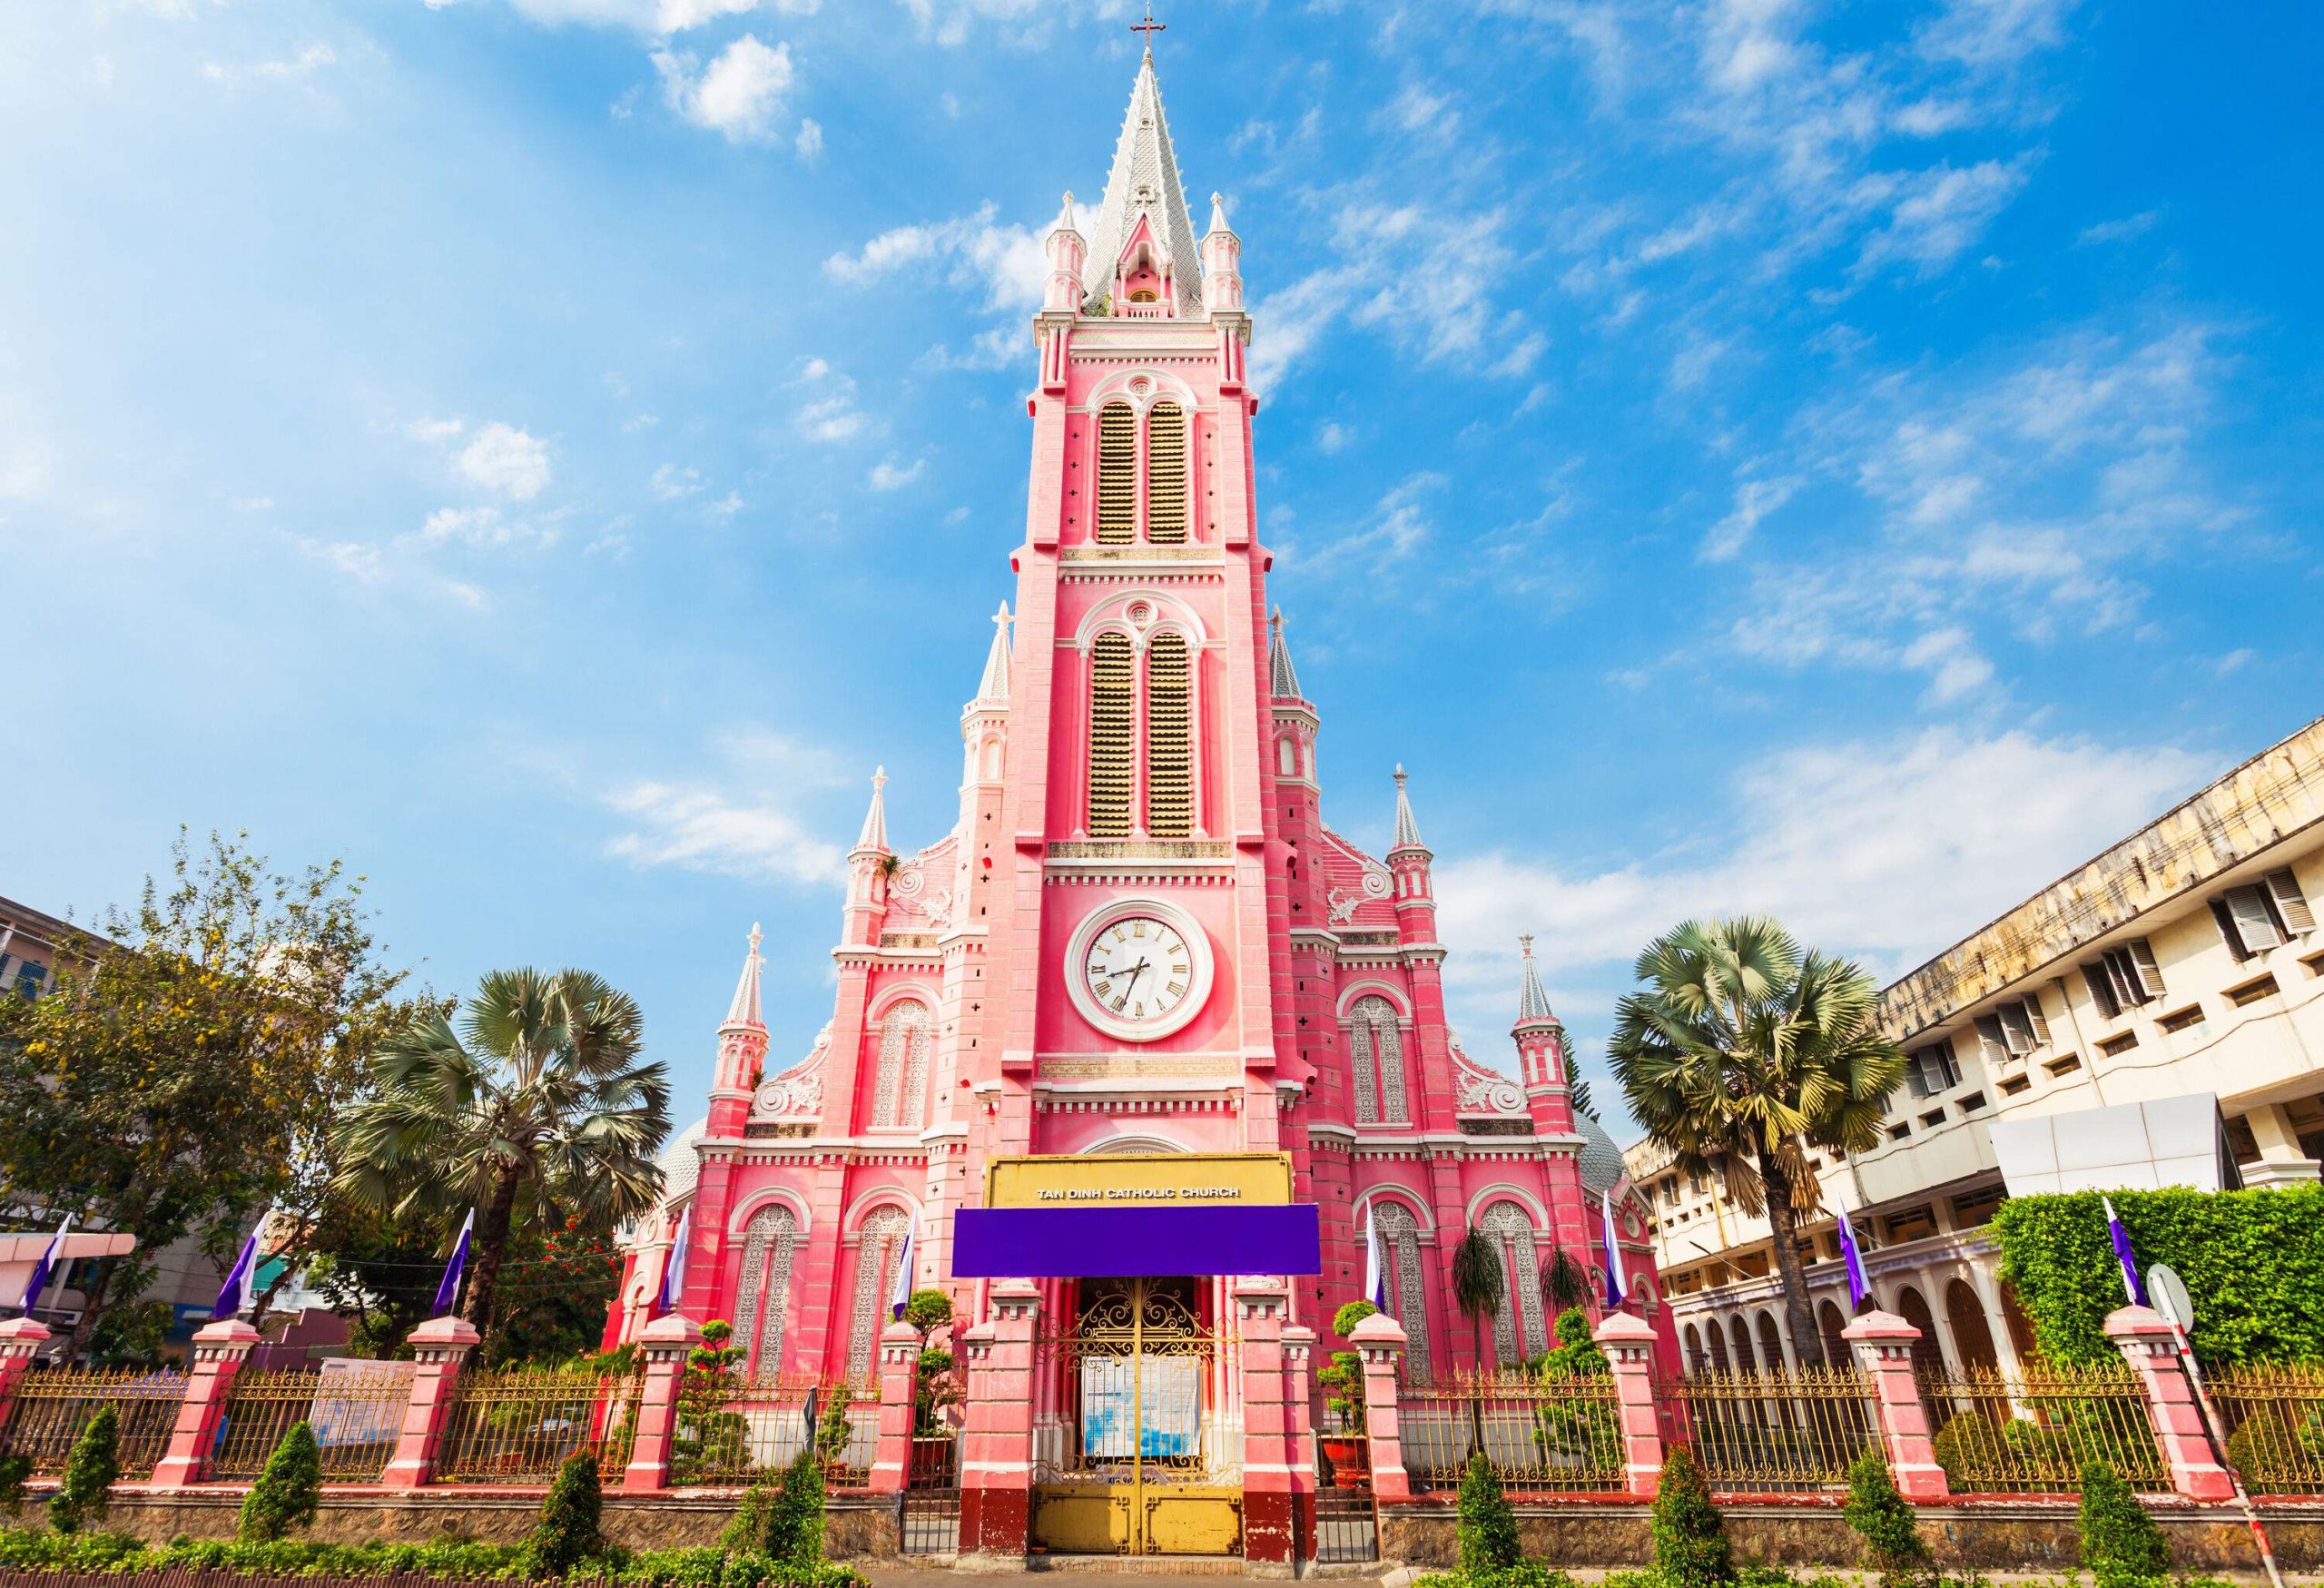 A remarkable pastel pink church with a central clock tower between the buildings.